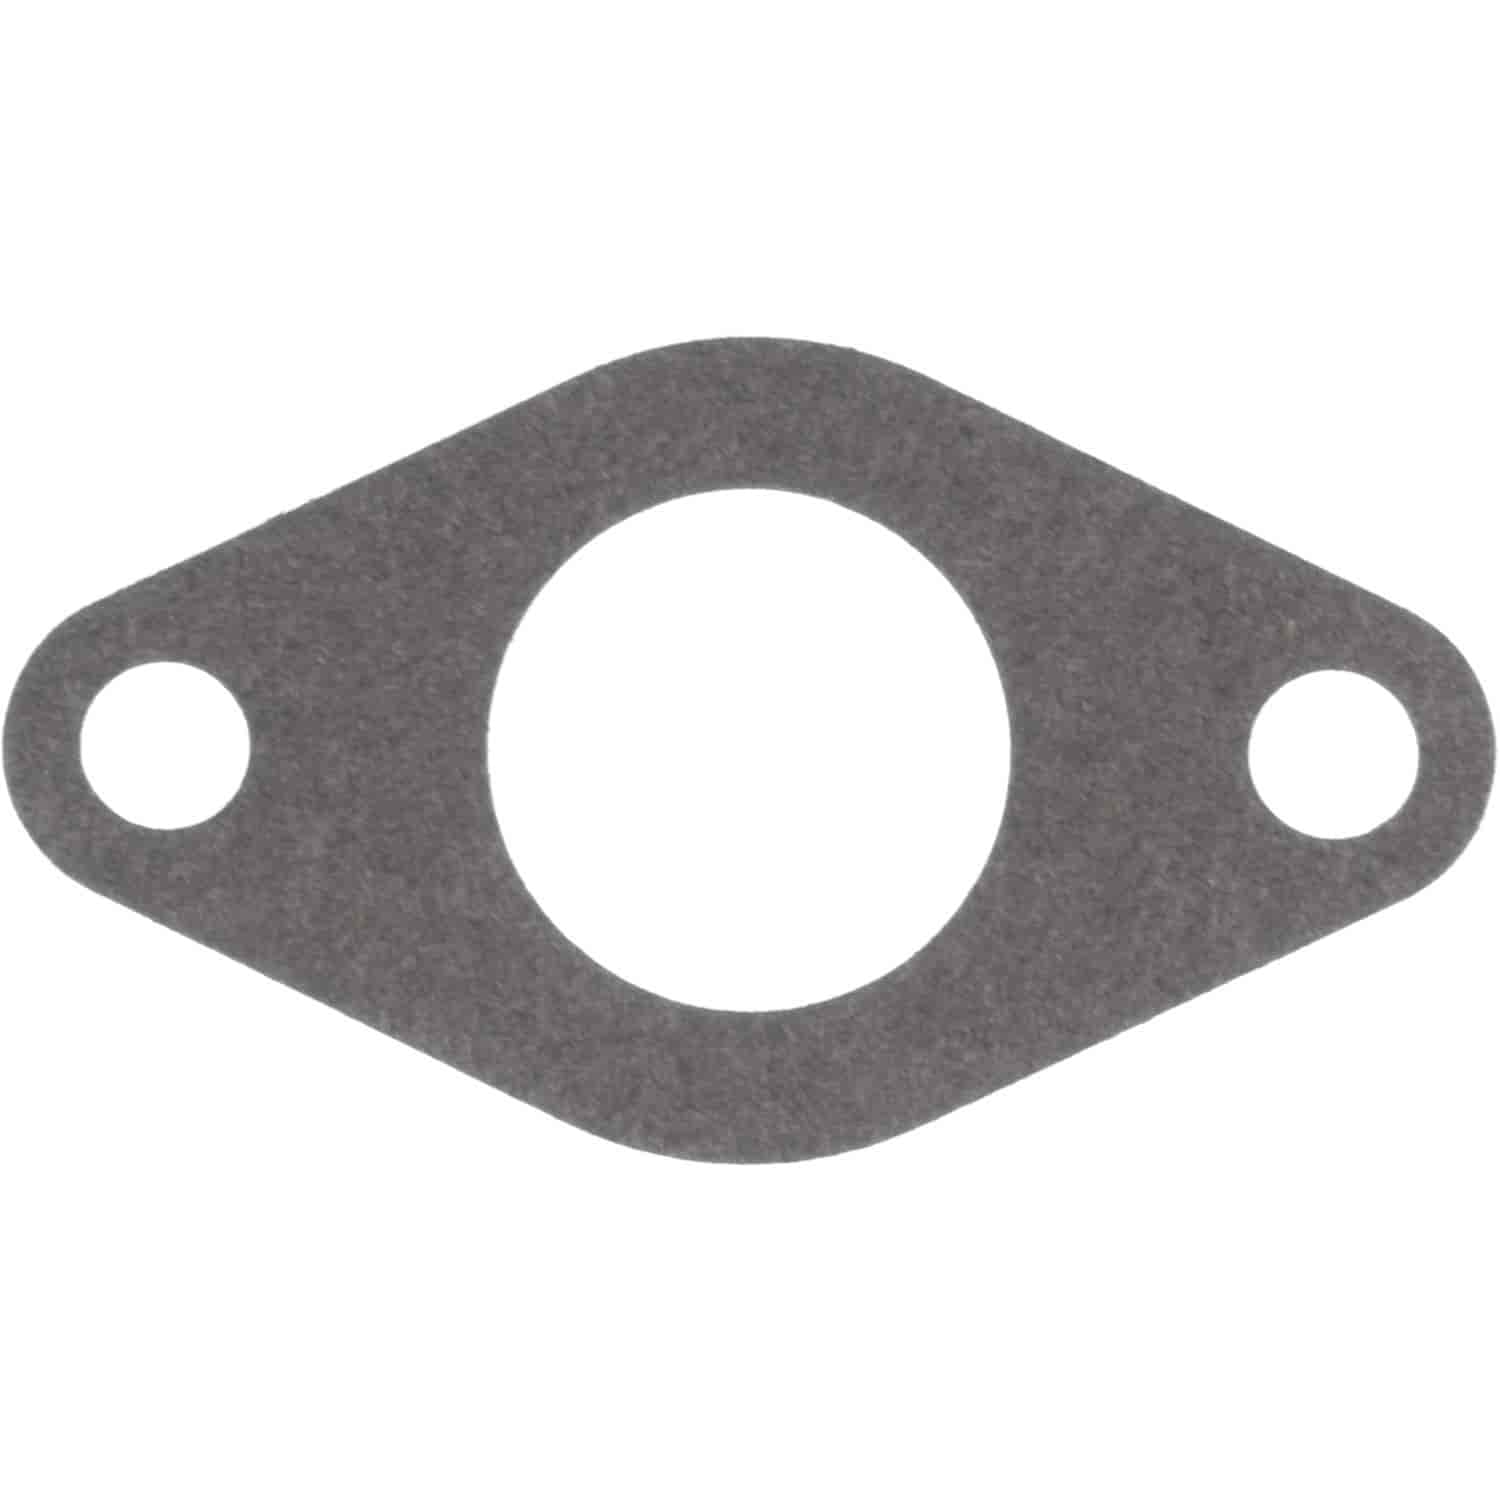 Water Pump Mounting Gasket 1957-1976 Ford FE V8 330/332/352/360/361/390/406/410/427/428